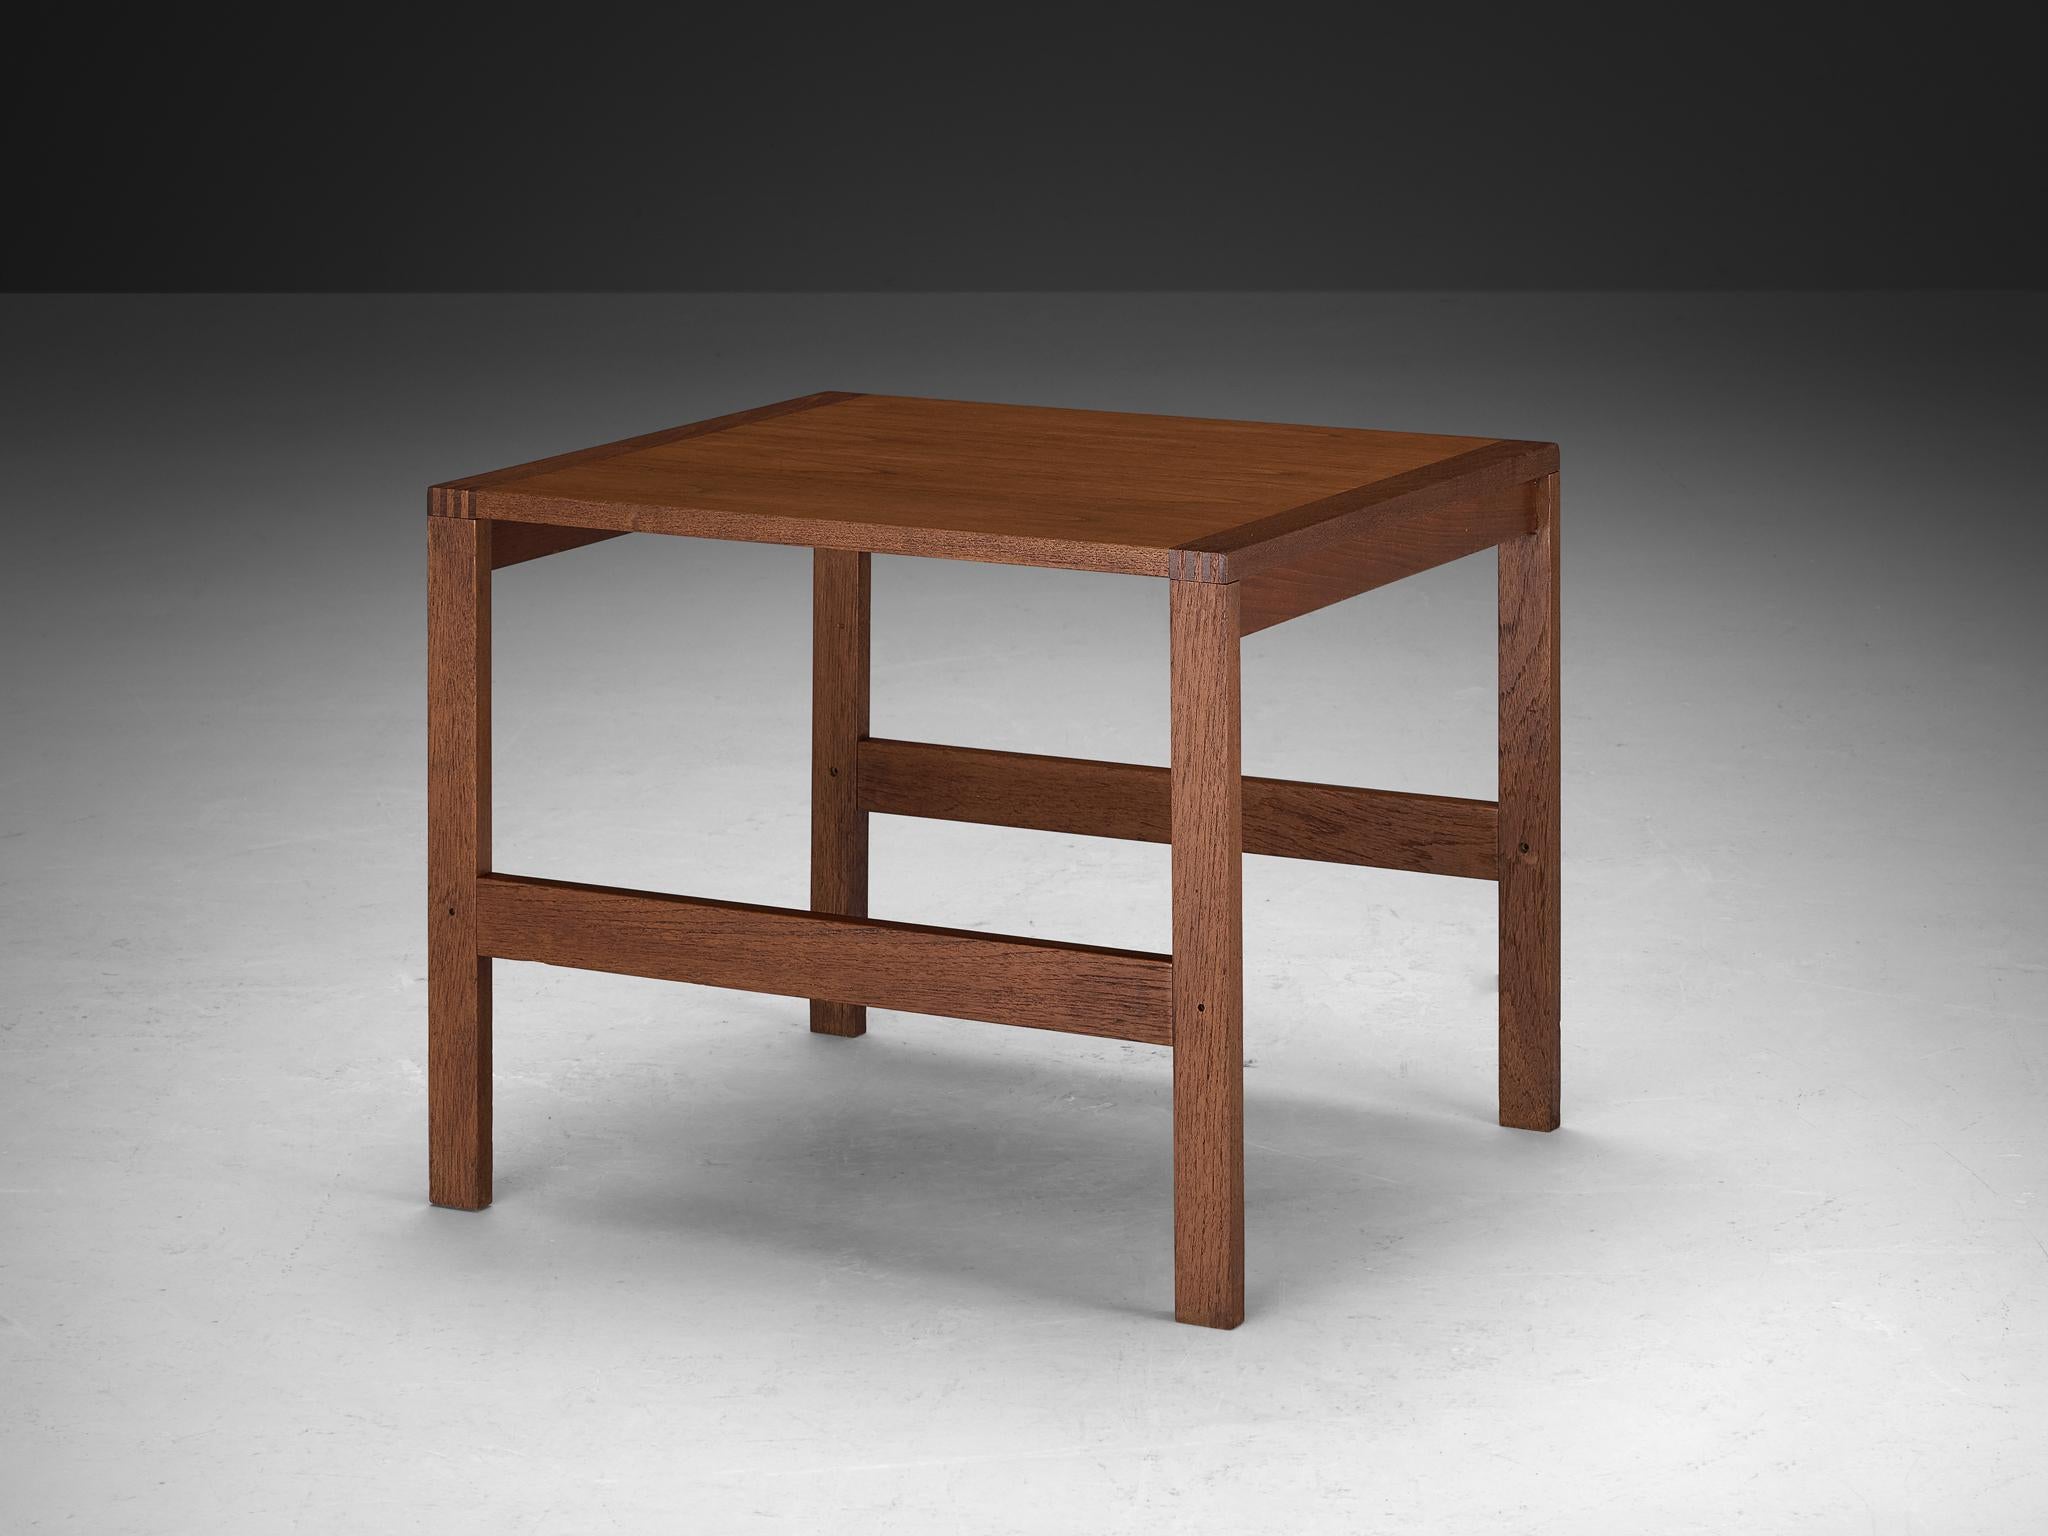 Ole Gjerløv-Knudsen & Torben Lind for France & Søn, side table, teak, Denmark, 1960s

The side table contains a strong and sturdy construction crafted from teak, characterized by its sharp, clear lines evident along the edges of the top and on the